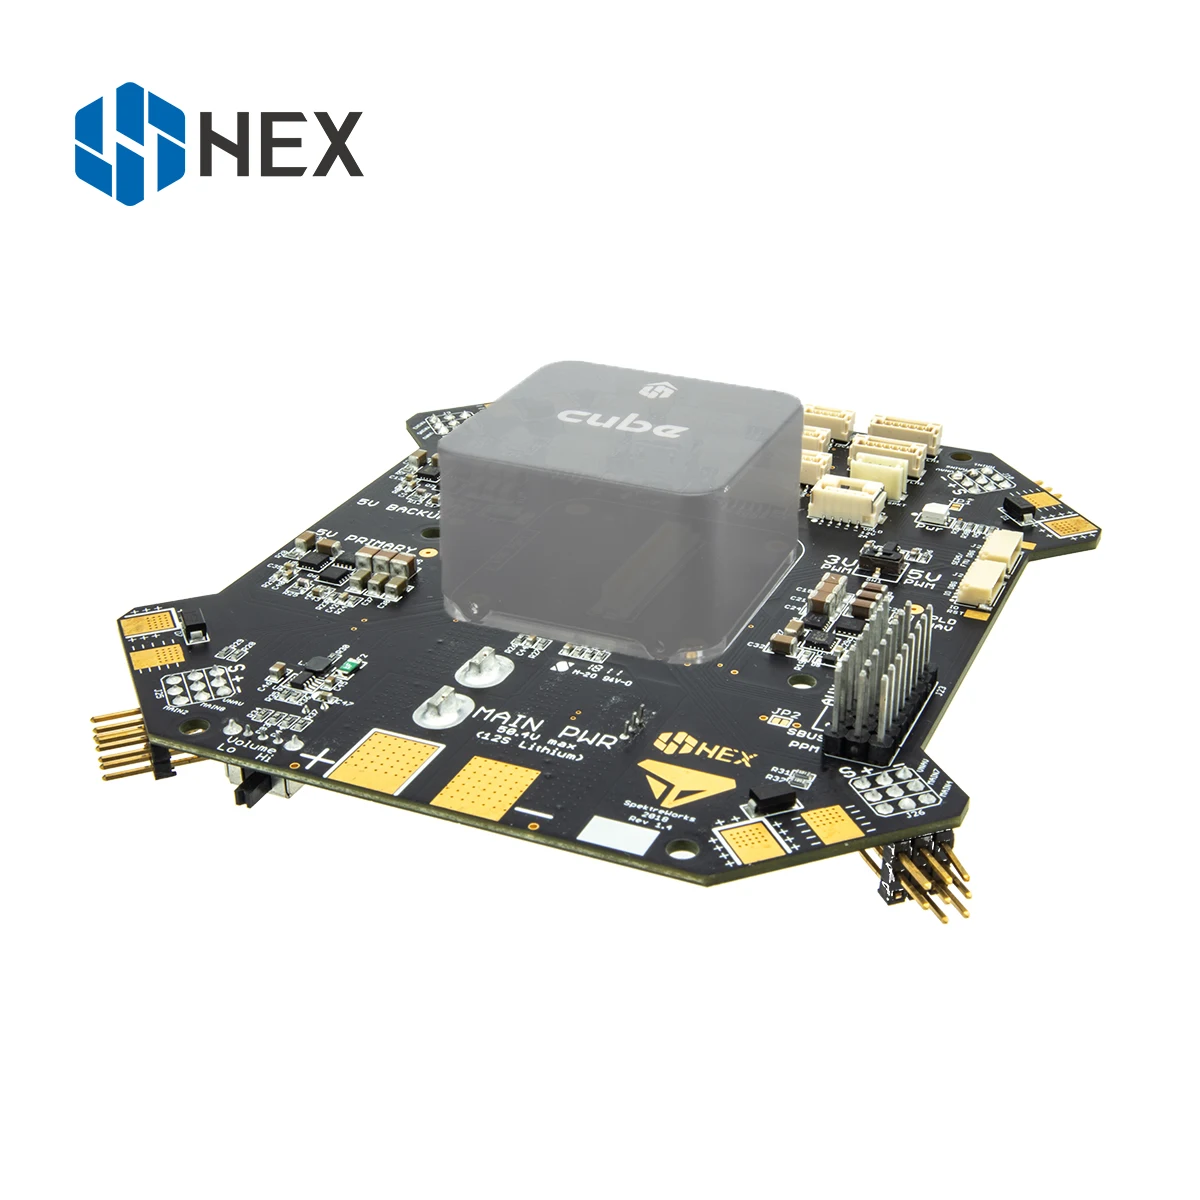 

HEX Kore Carrier Board Pixhawk2 multi-axis load plate is suitable for cube master control module